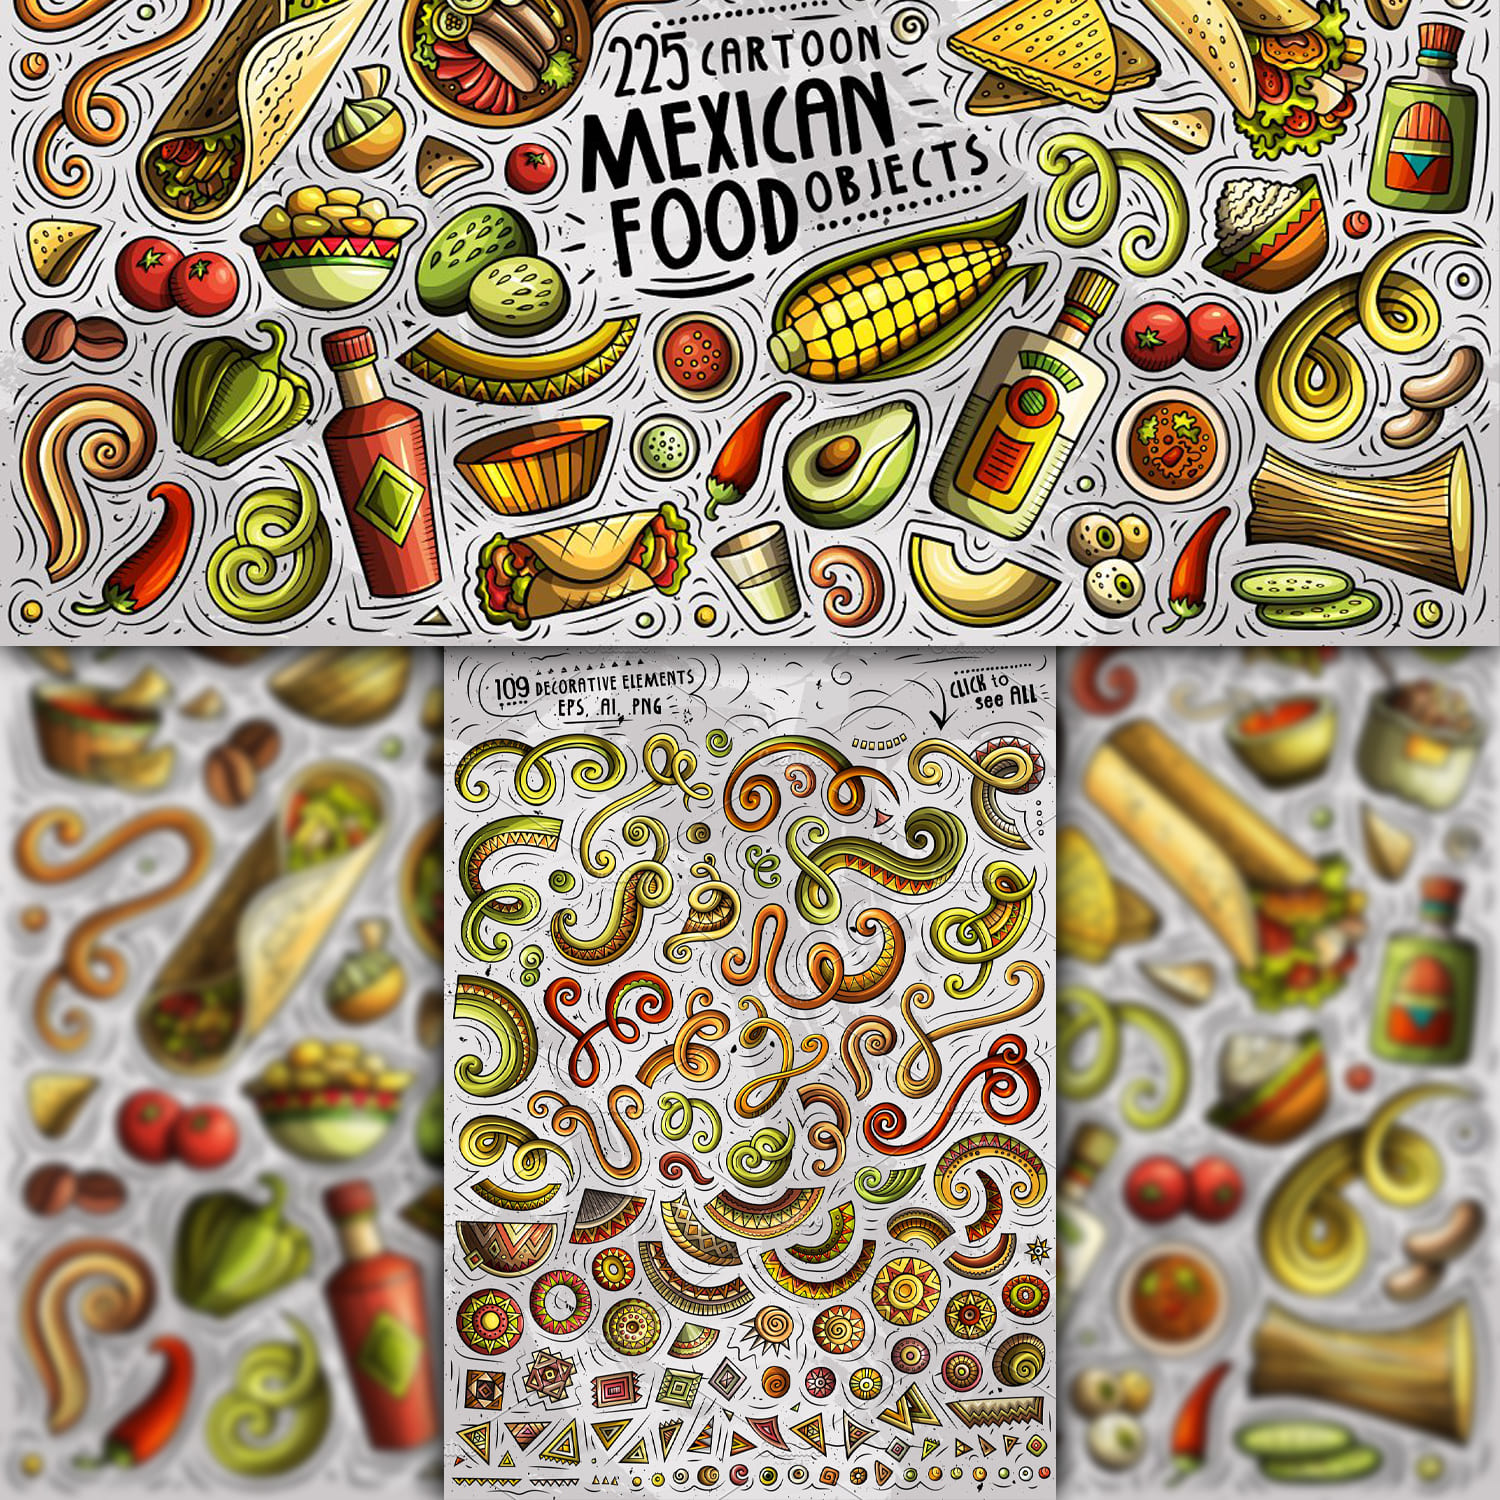 Mexican Food Cartoon Objects Set 1500 1500 2.